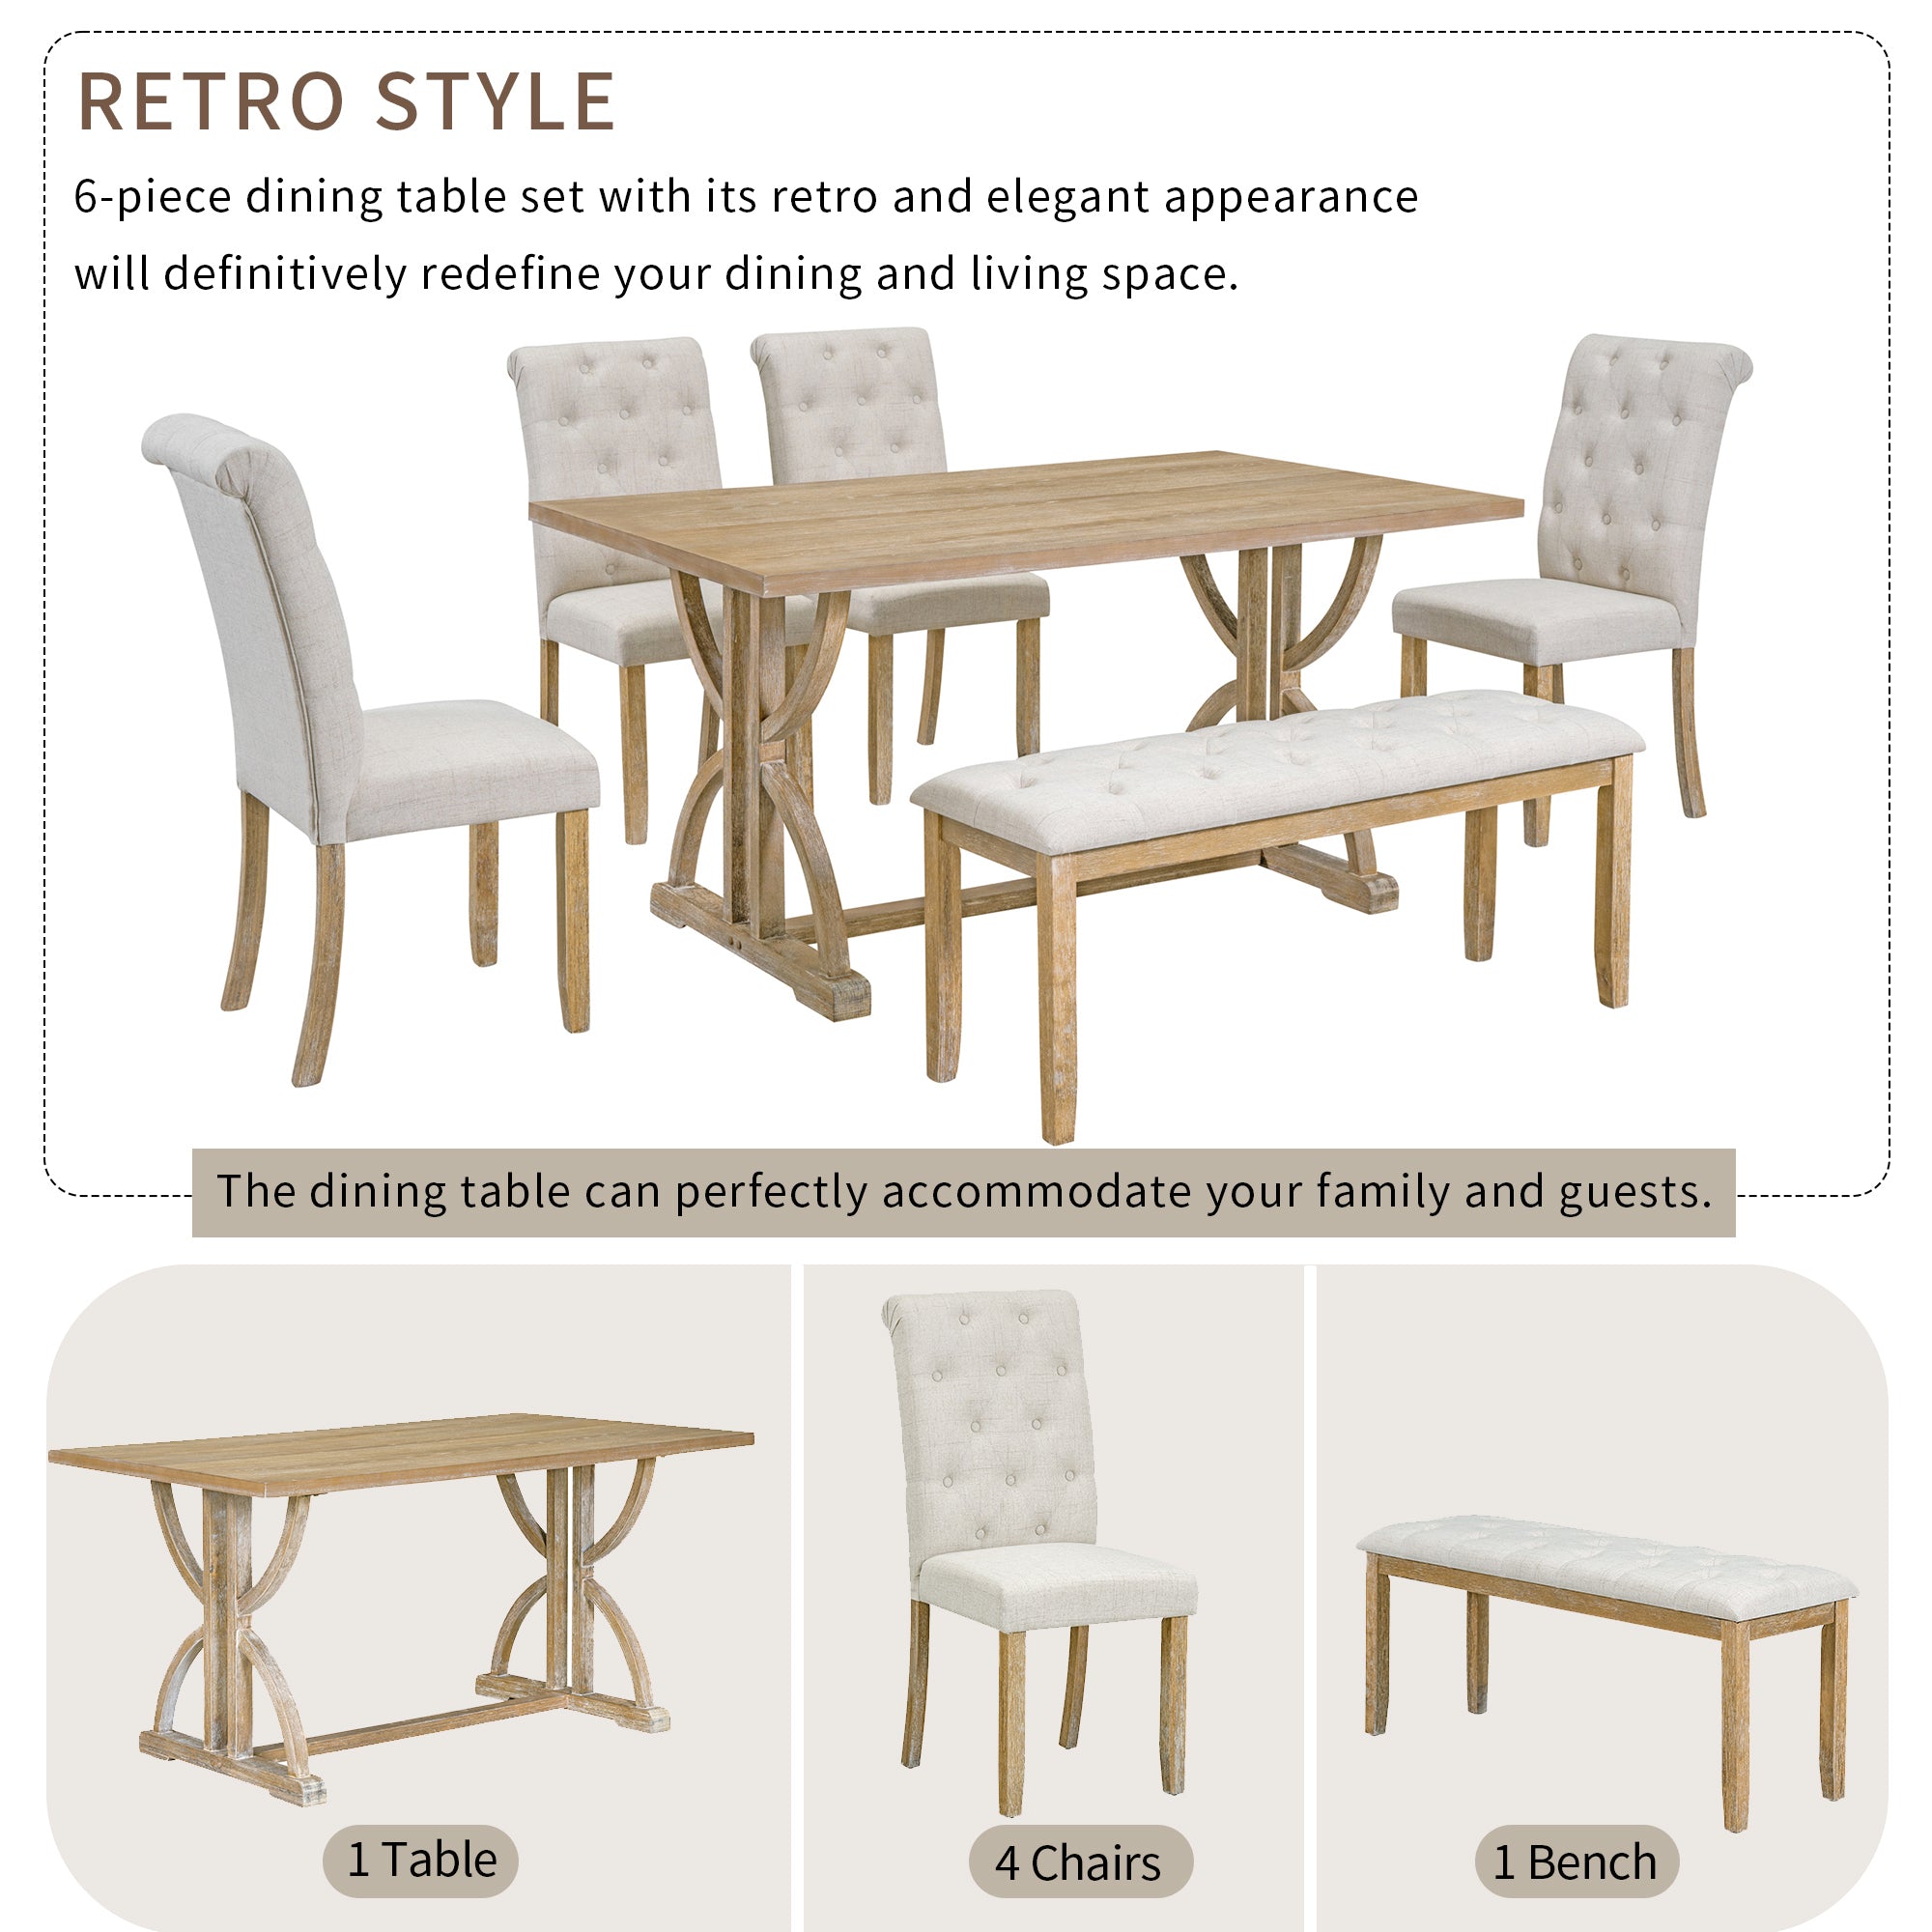 6-Piece Retro Rectangular Dining Table Set, Table with Unique Legs and 4 Upholstered Chairs & 1 Bench - Natural Wood Wash